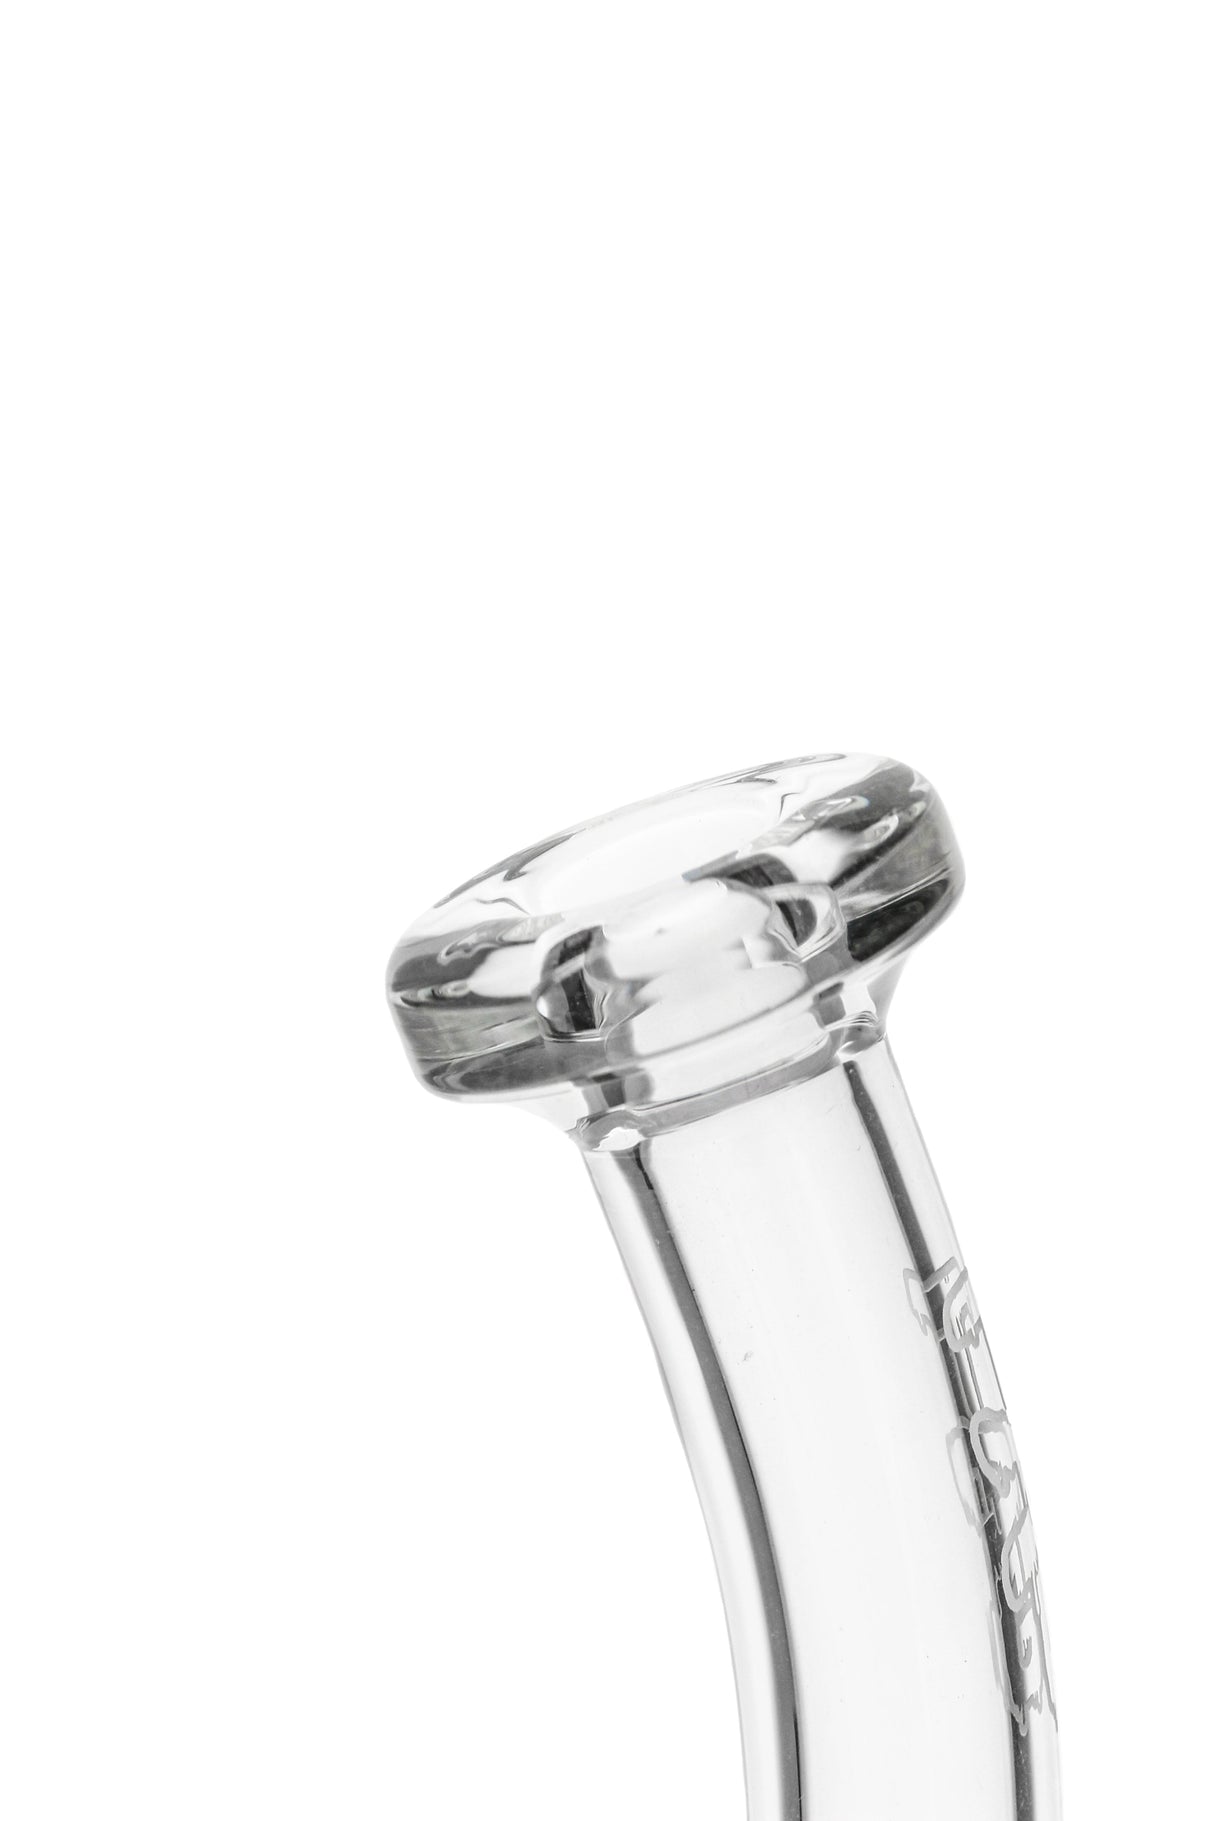 Close-up of TAG bent neck bong with clear super slit puck diffuser and 18MM female joint